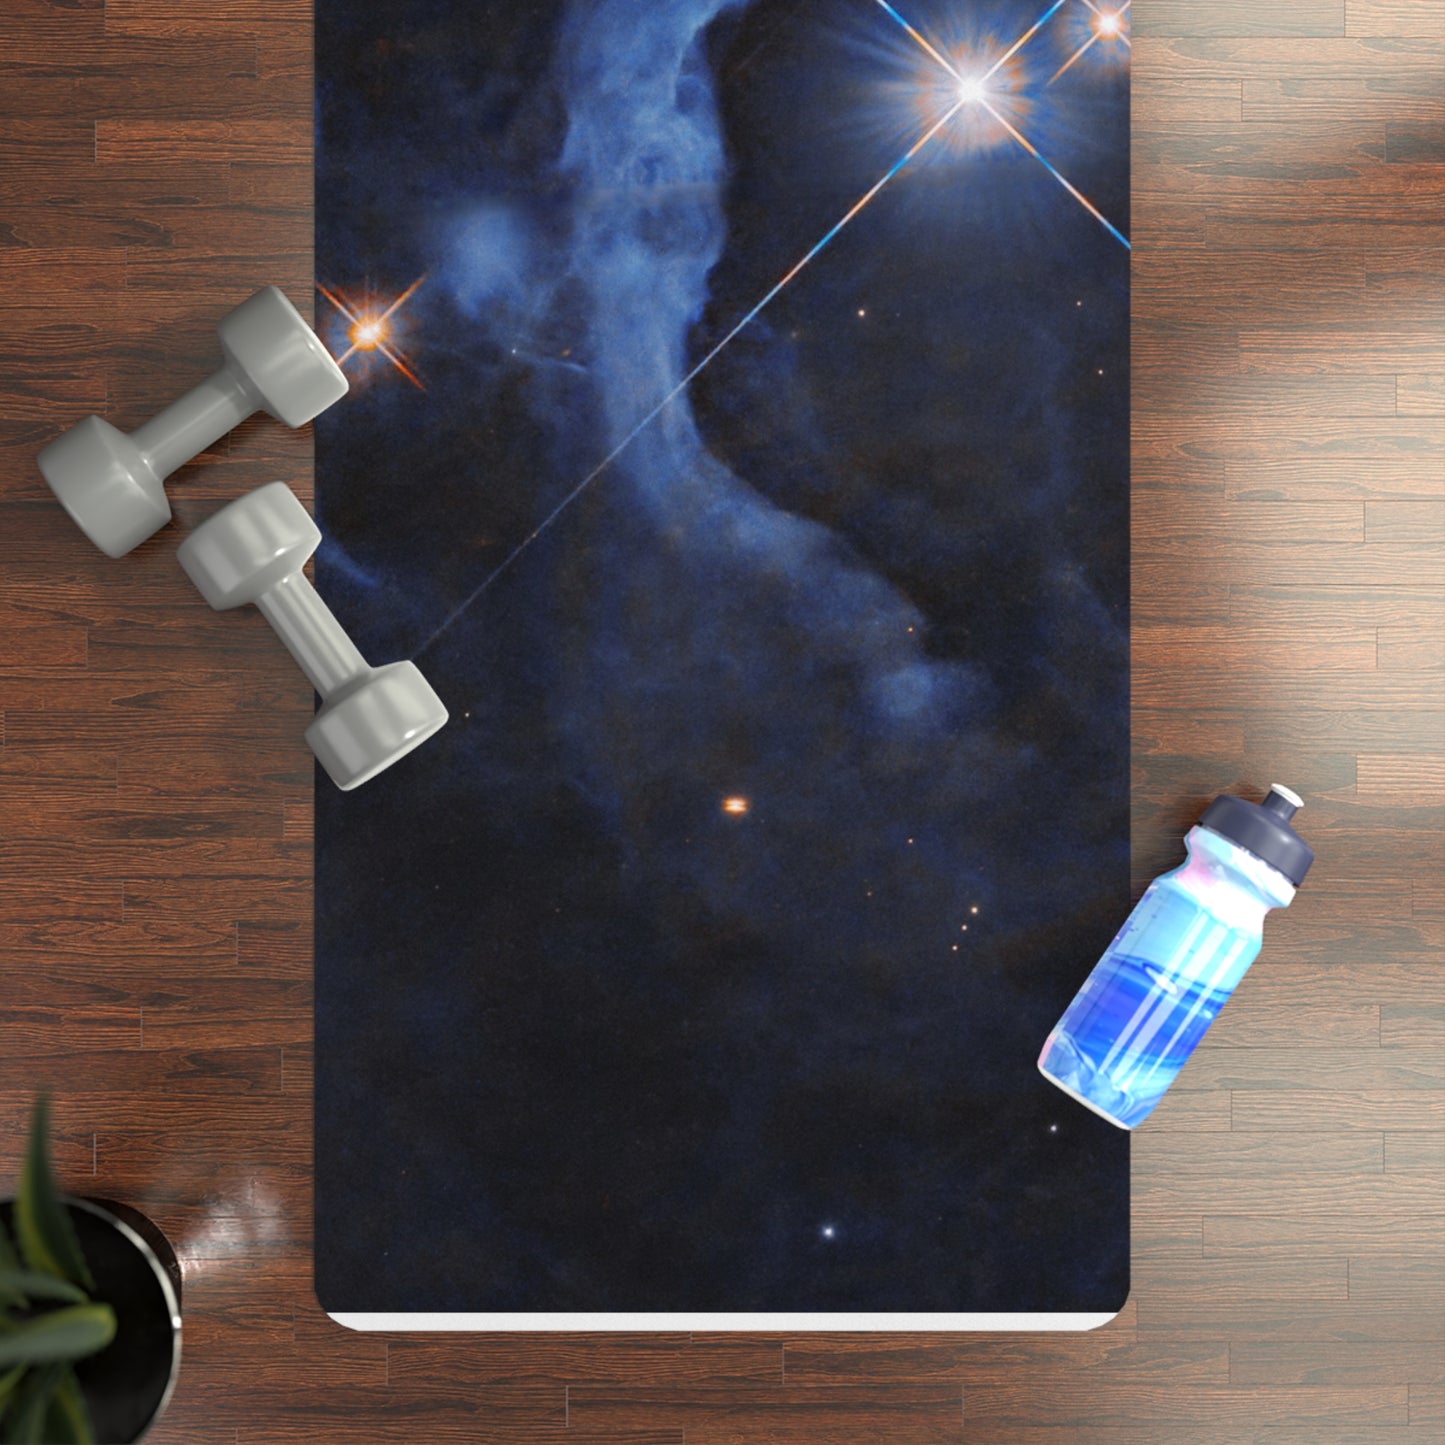 HP Tau, HP Tau G2, and G3 3 star system captured by Hubble - Yoga Mat